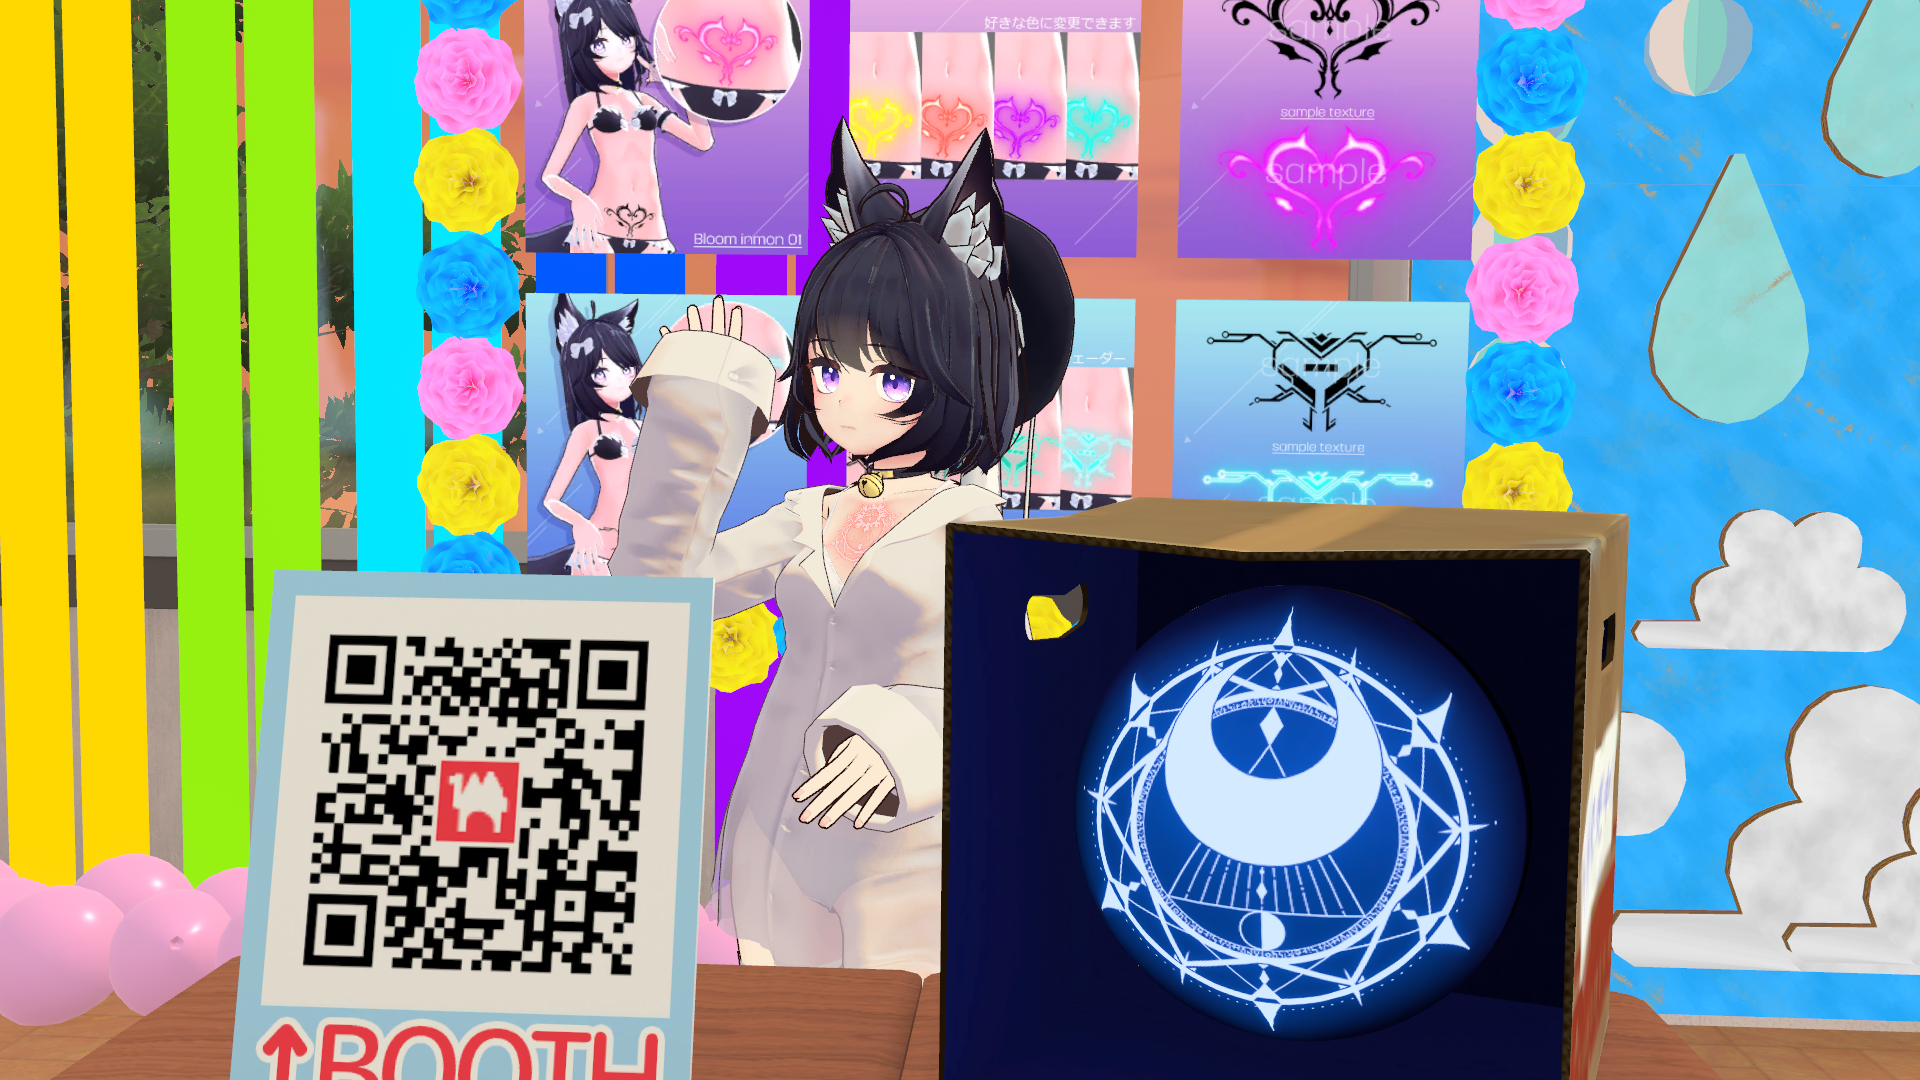 VRChat_1920x1080_2021-12-05_02-01-51.564.png